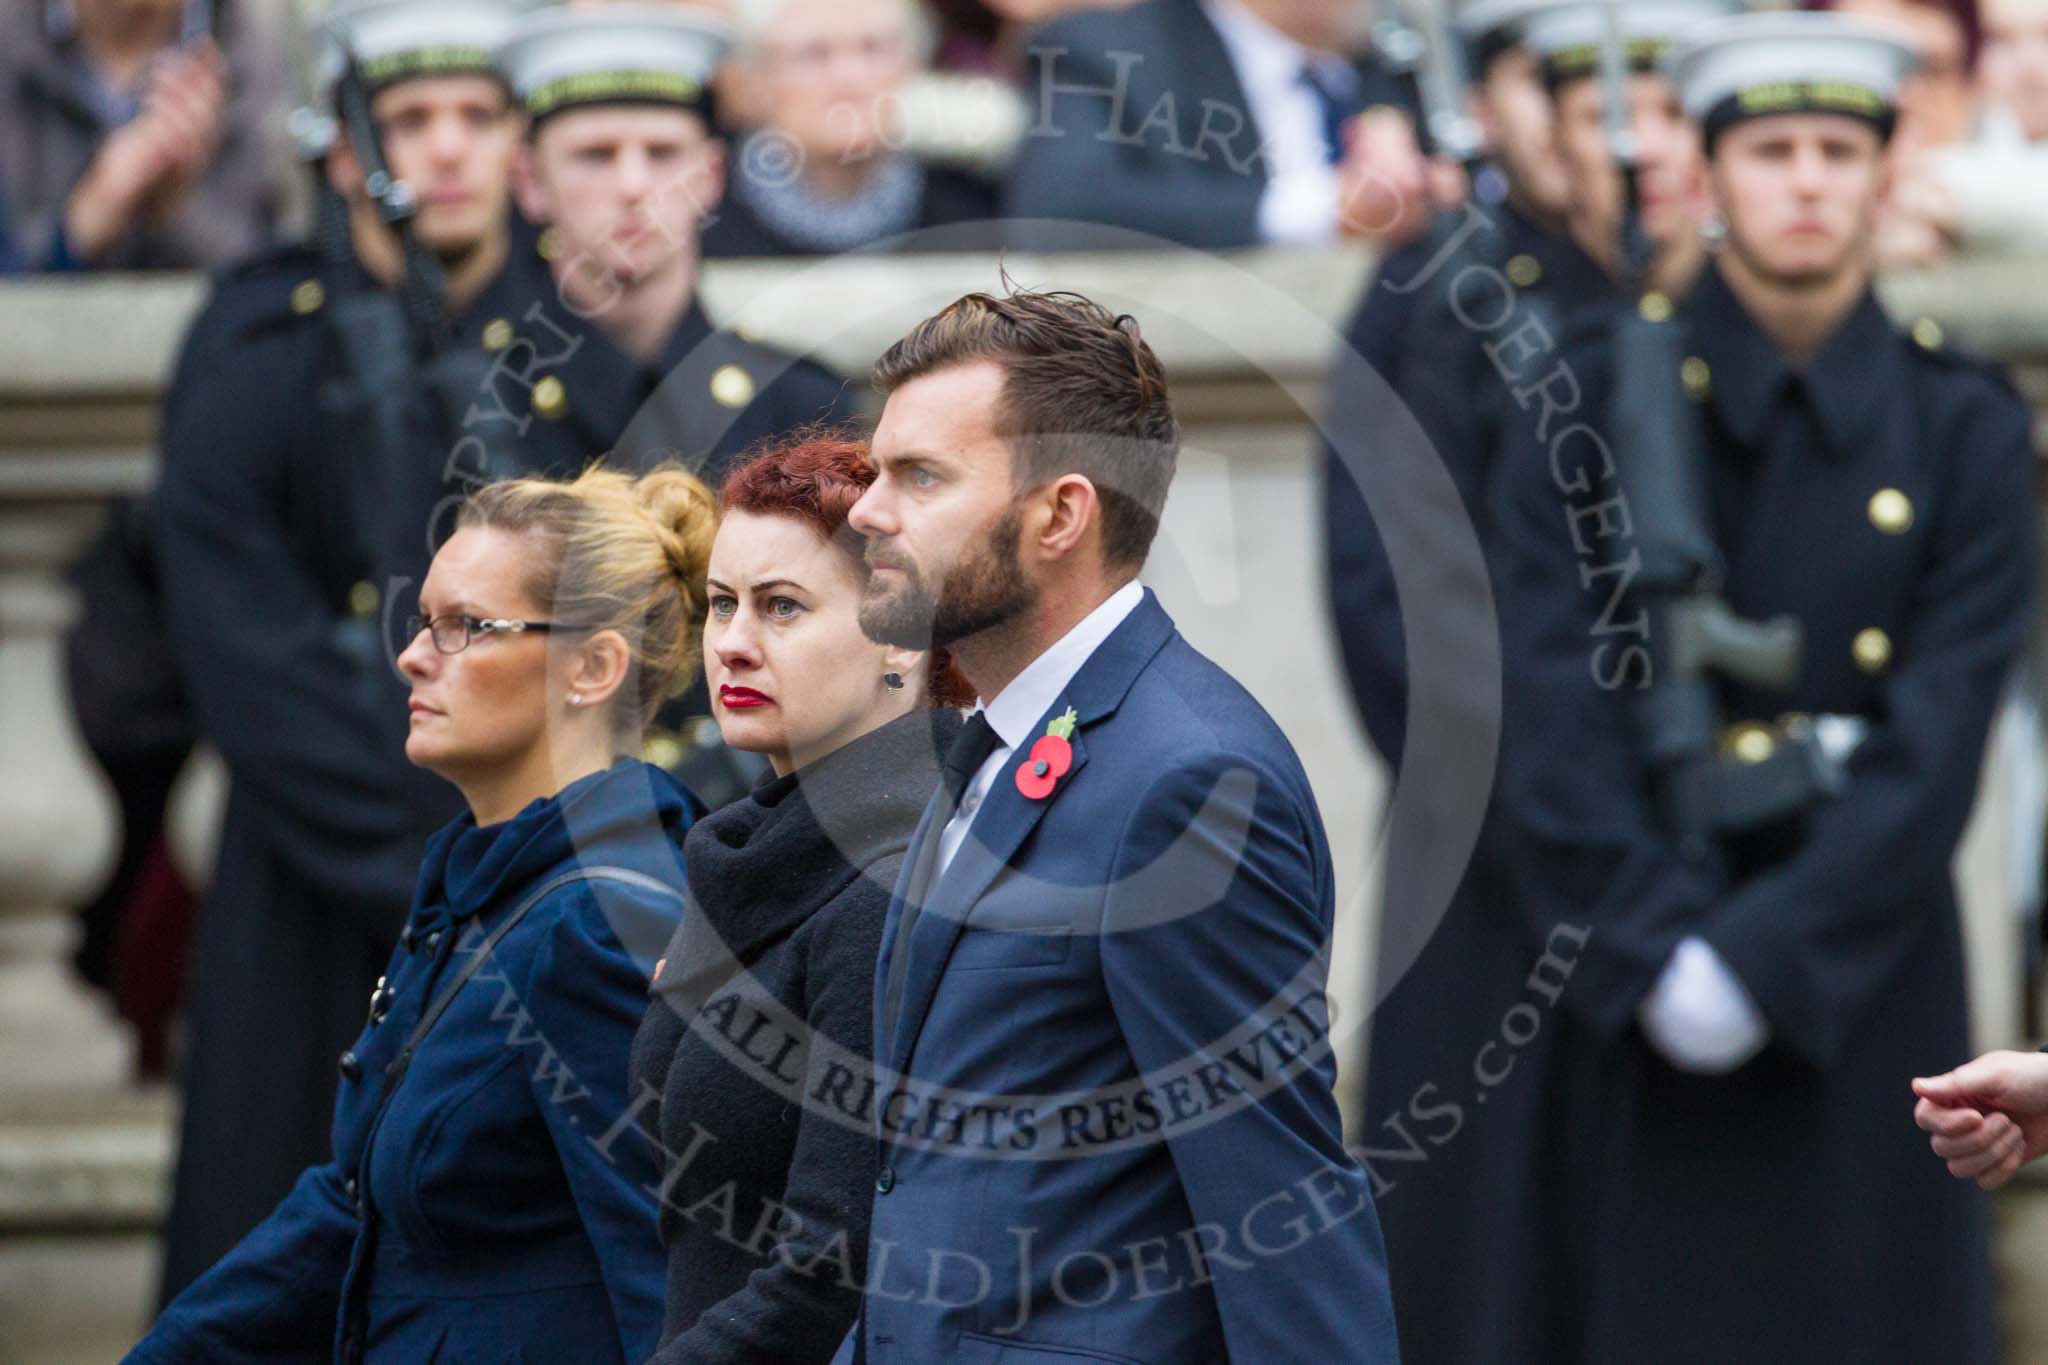 Remembrance Sunday at the Cenotaph 2015: If you know which group is shown here, please email cenotaph@haraldjoergens.com.
Cenotaph, Whitehall, London SW1,
London,
Greater London,
United Kingdom,
on 08 November 2015 at 12:21, image #1766